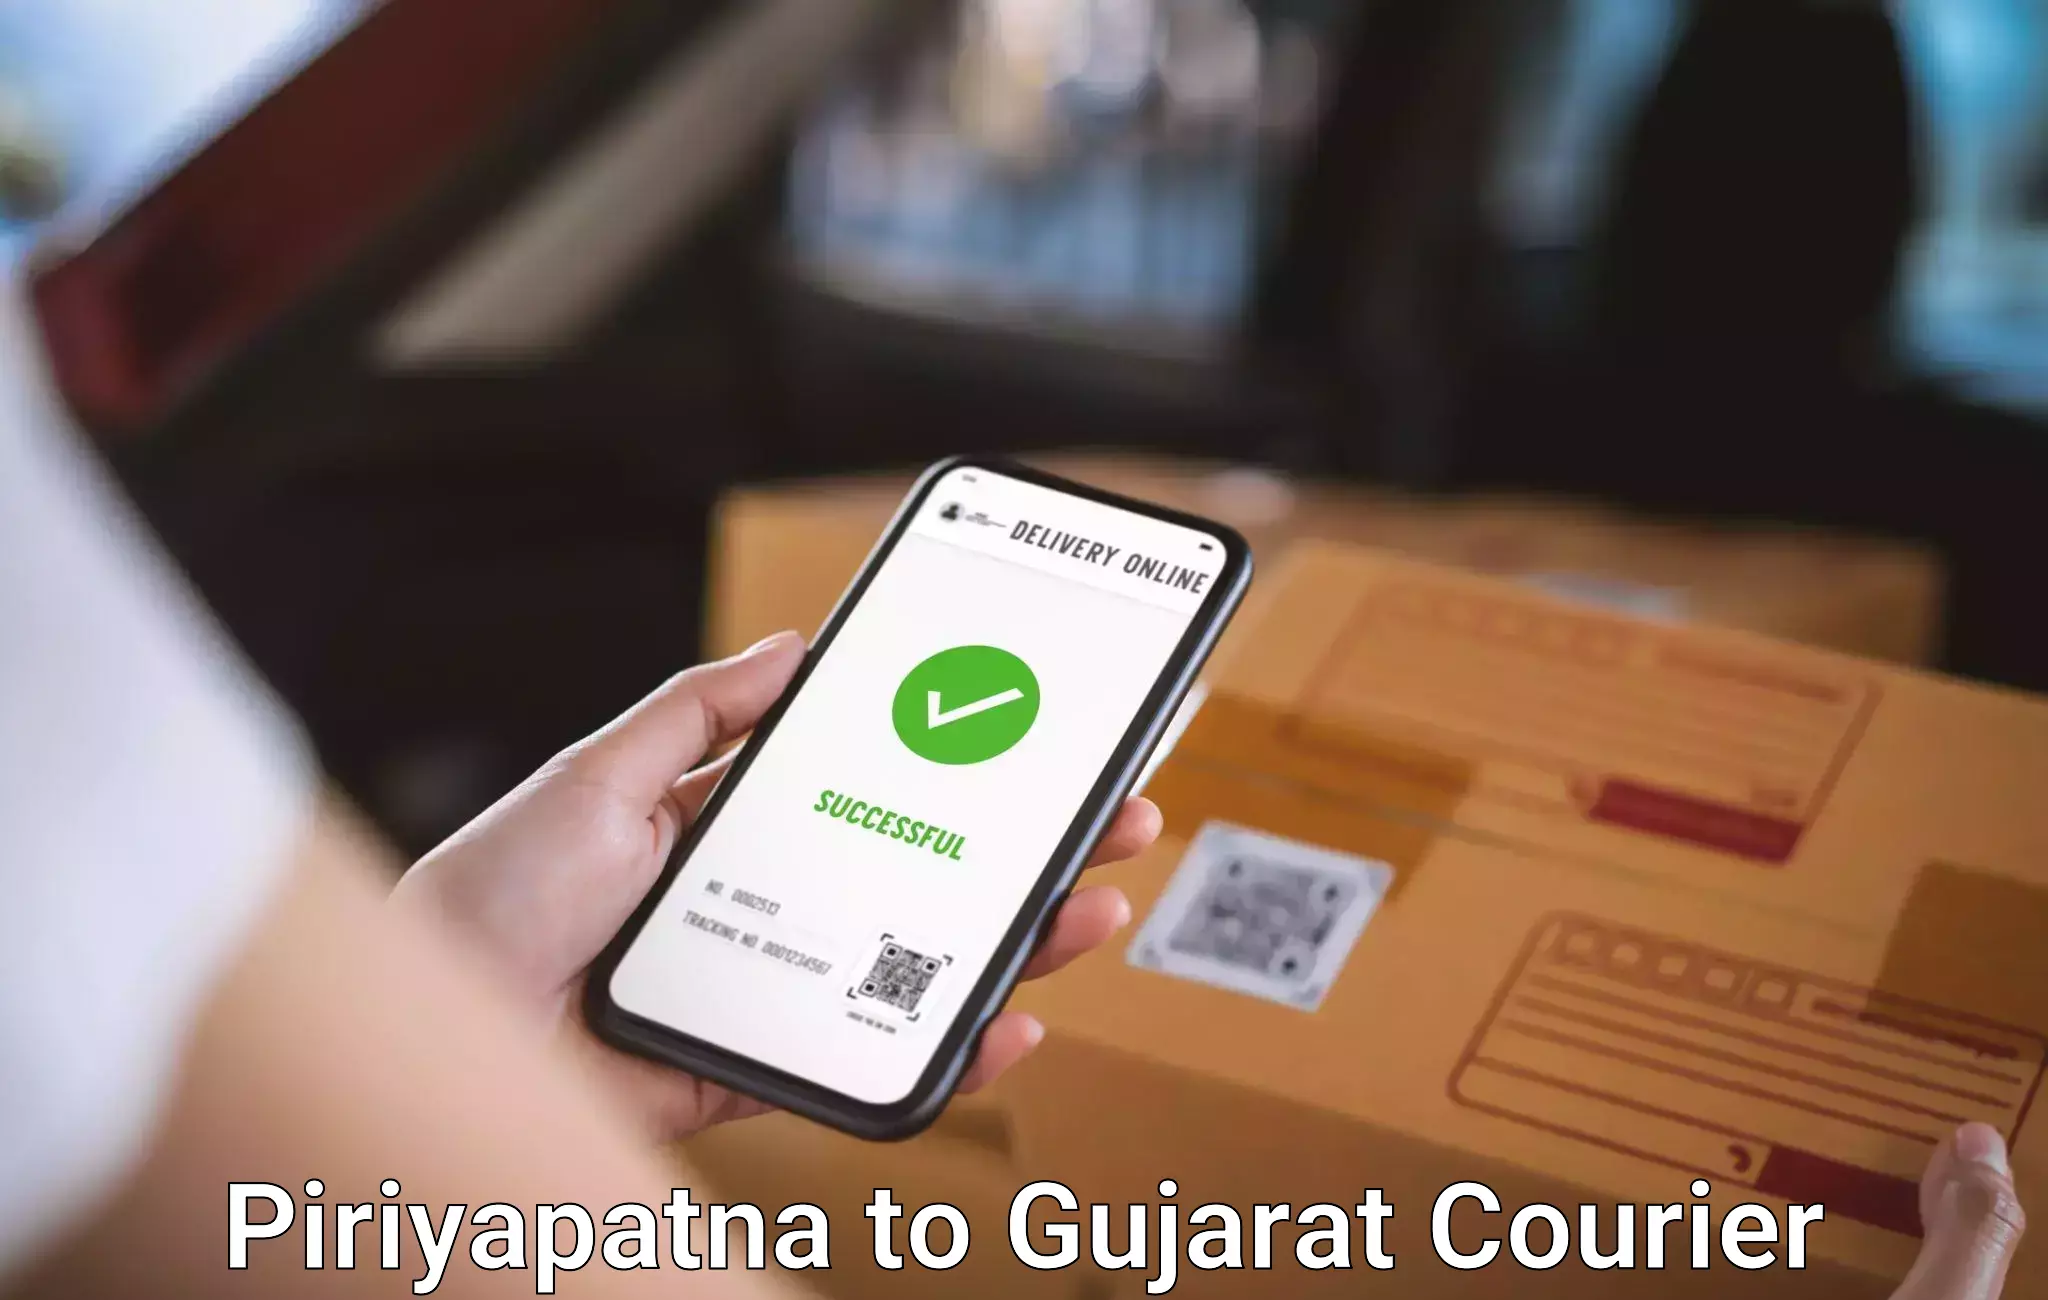 Online luggage shipping booking Piriyapatna to Anand Agricultural University